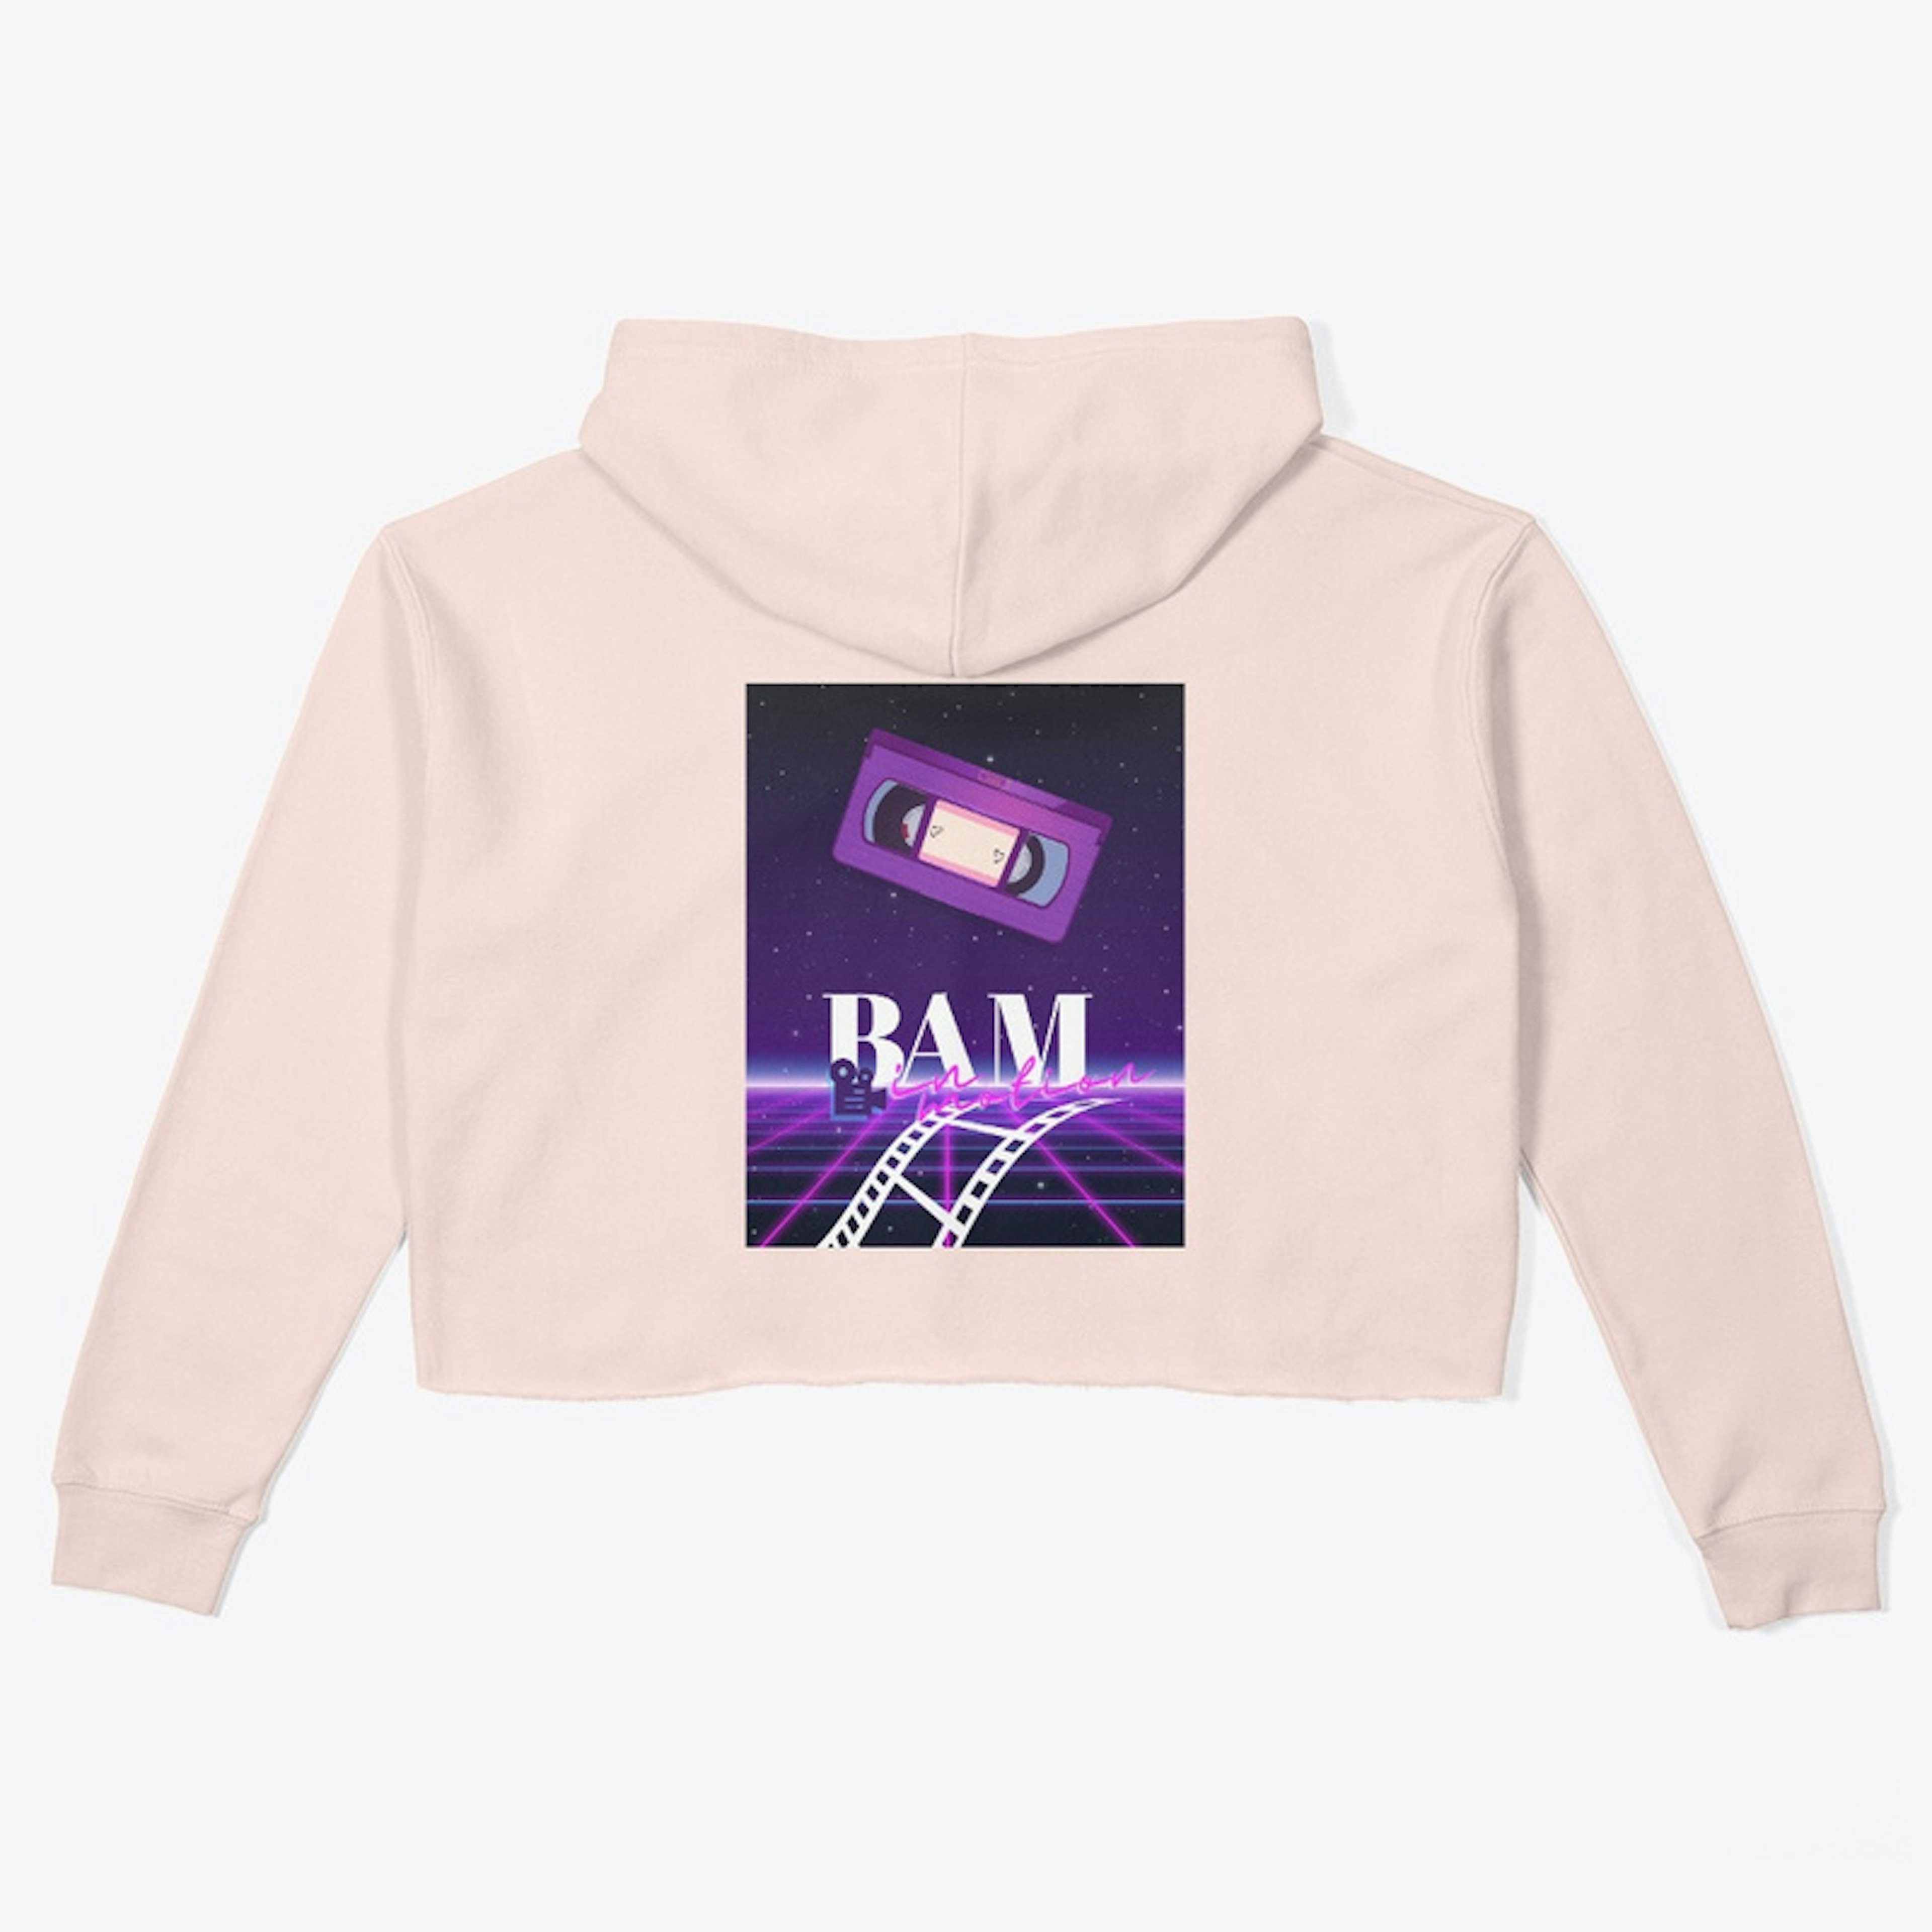 BAM in Motion 80s Hoodie